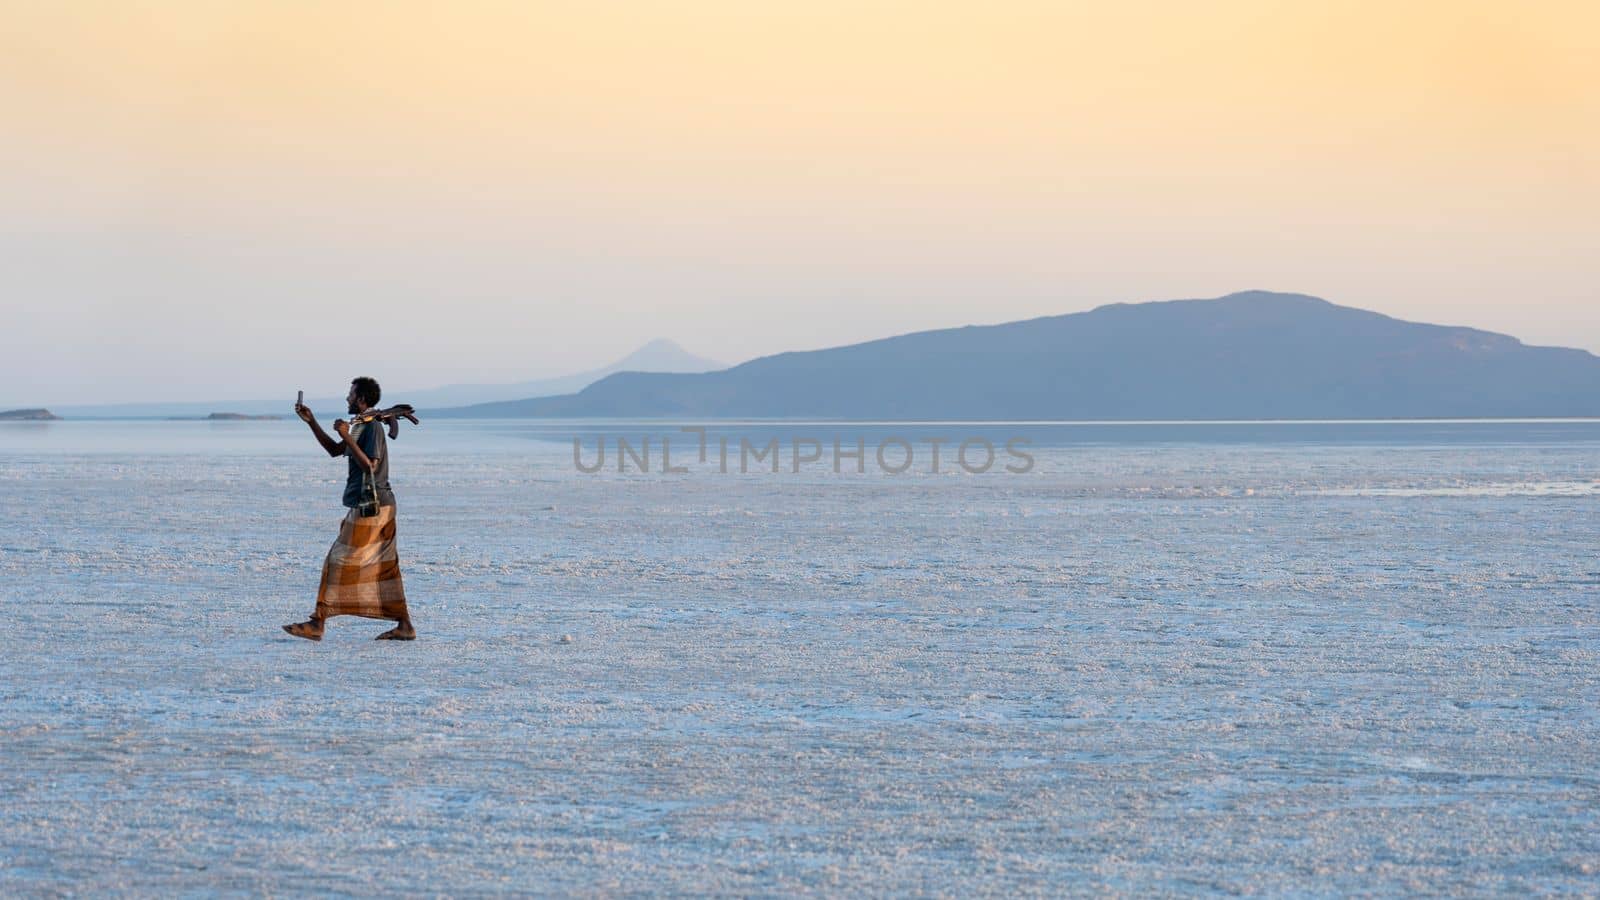 Sunset on the salt plains of Asale Lake in the Danakil Depression in Ethiopia. by maramade